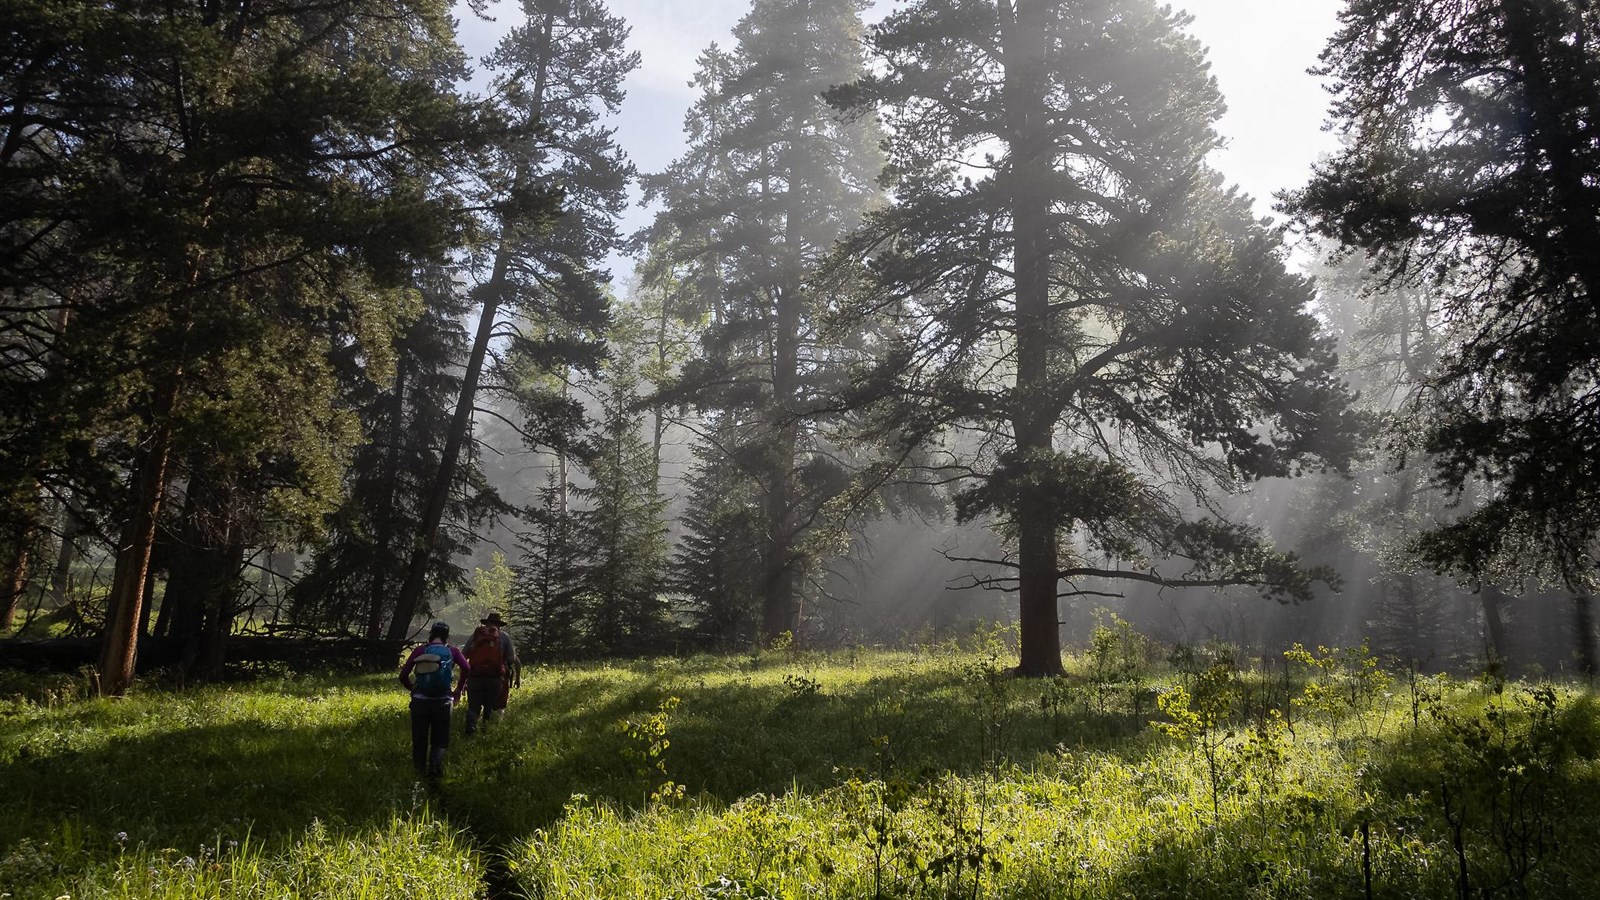 Two people hike through an open forest with sunlight filtering through the morning fog.